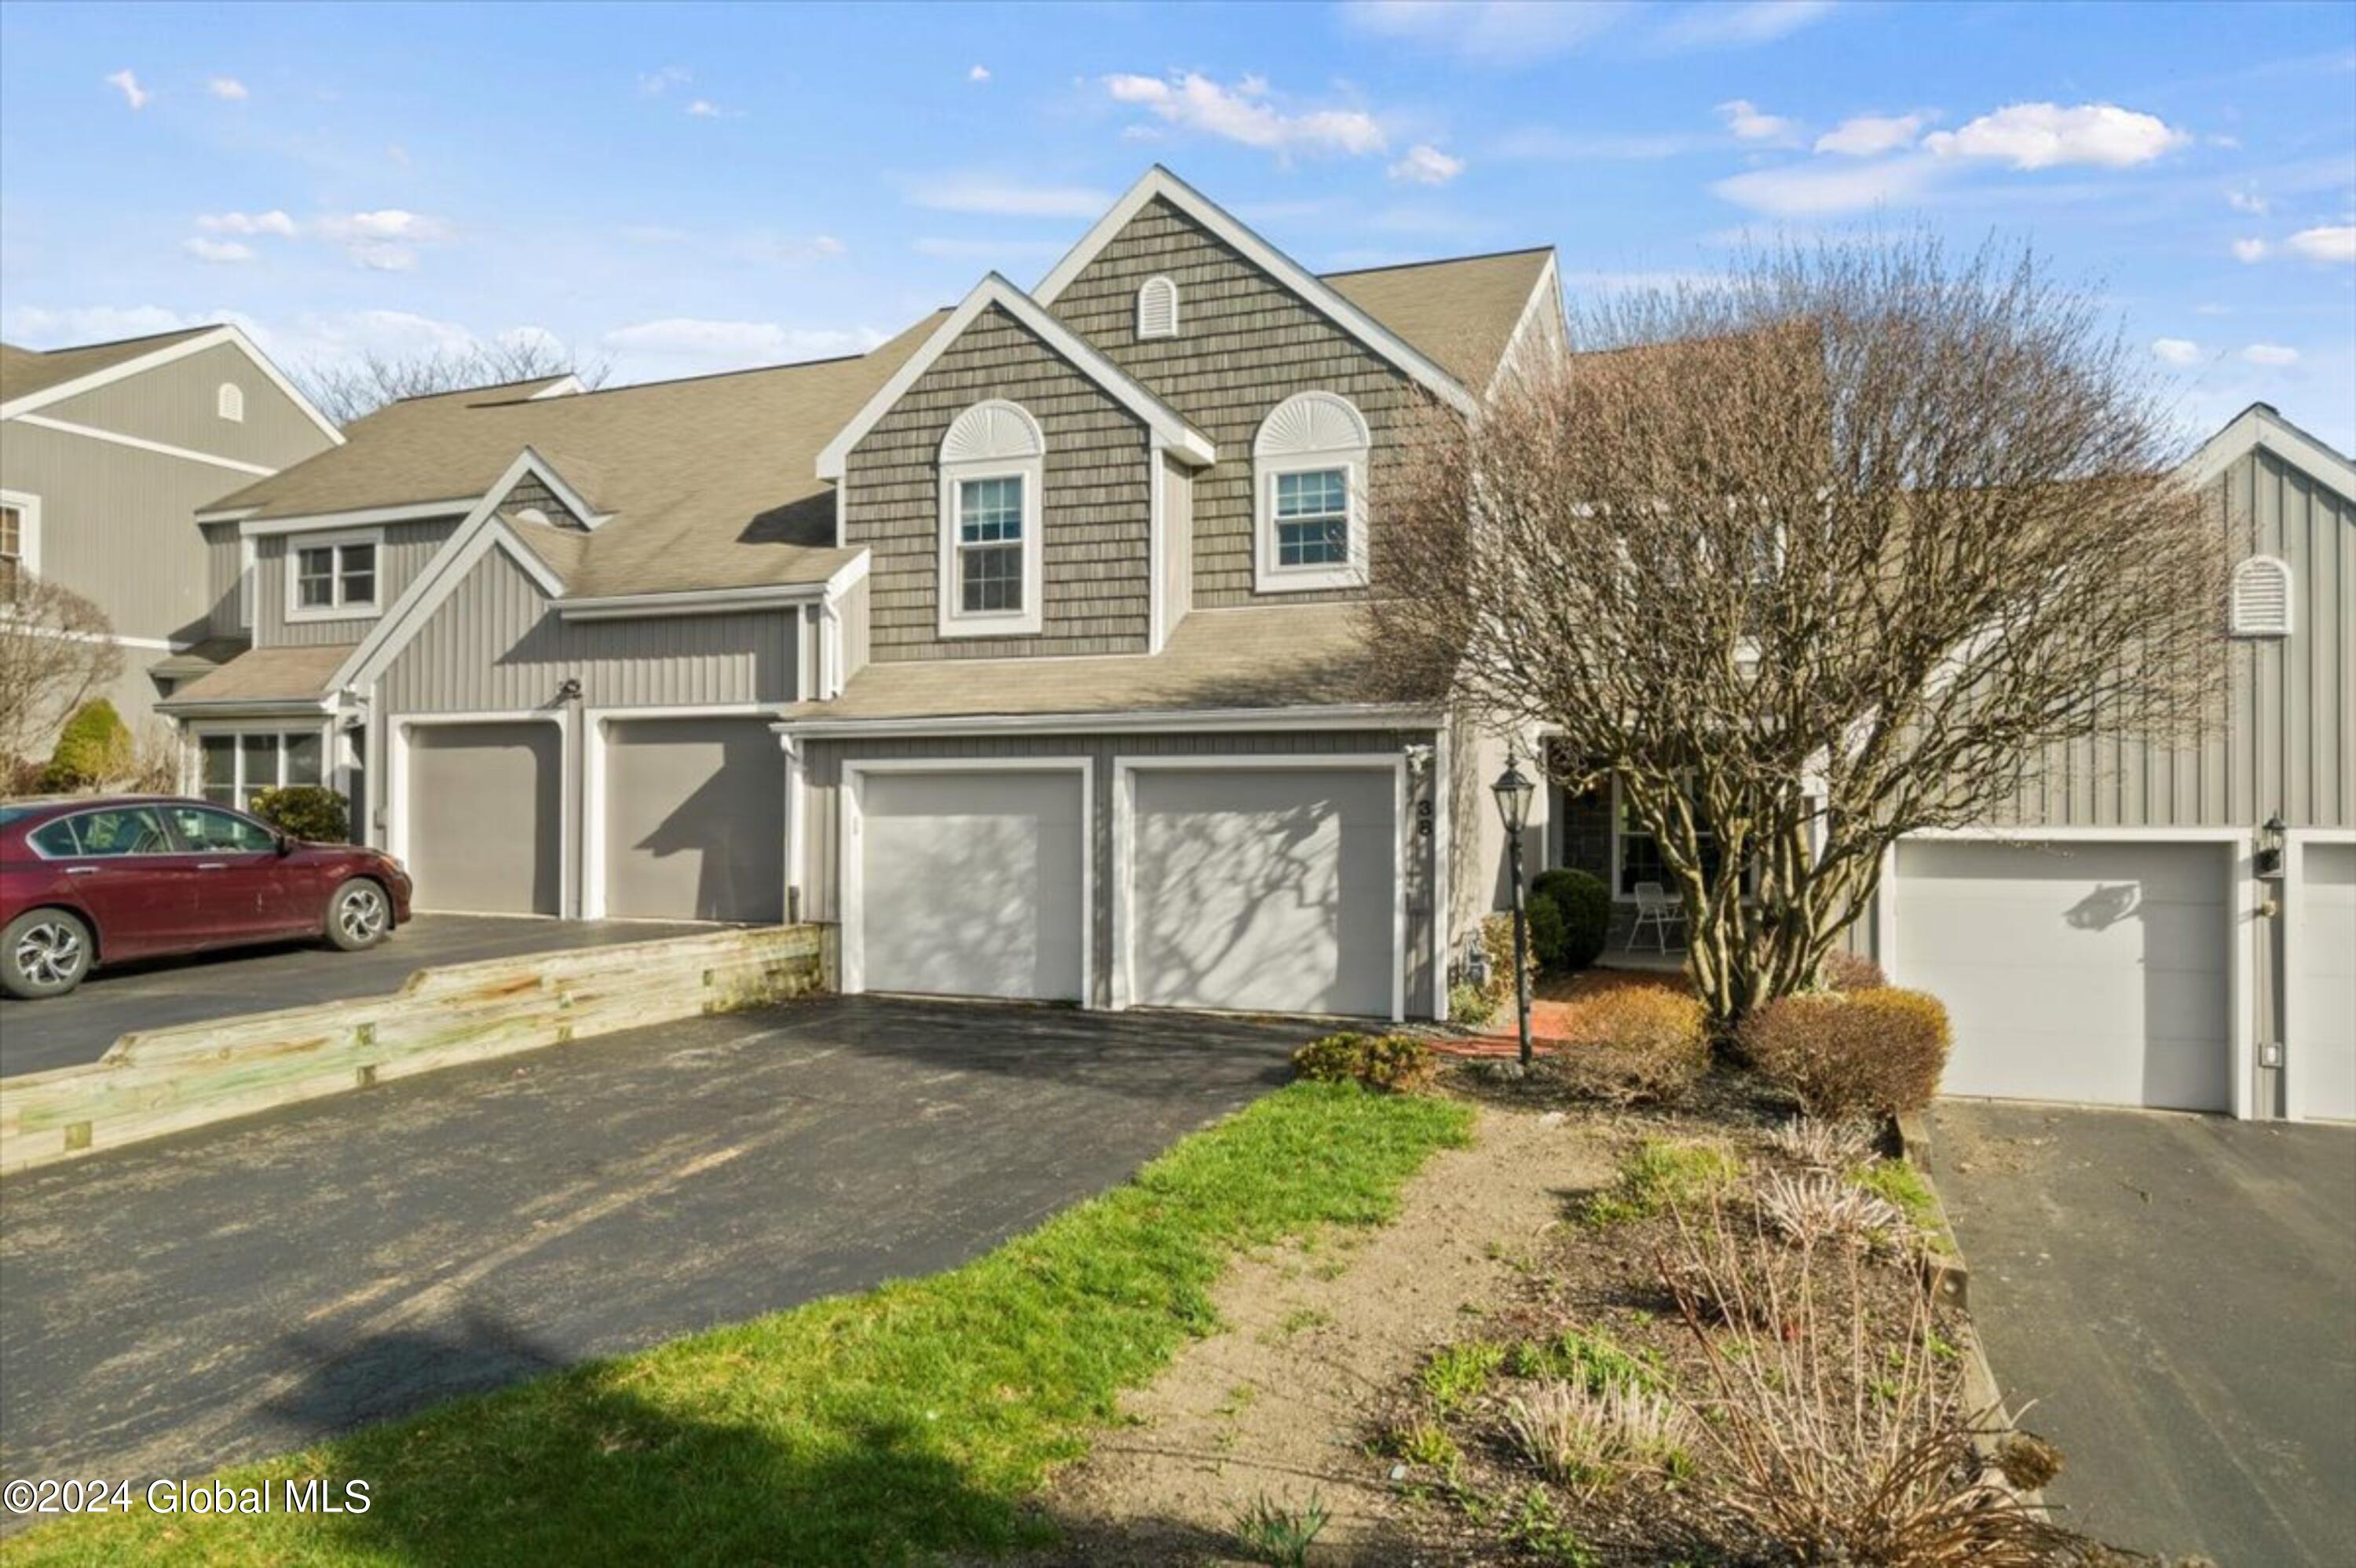 View Voorheesville, NY 12186 townhome